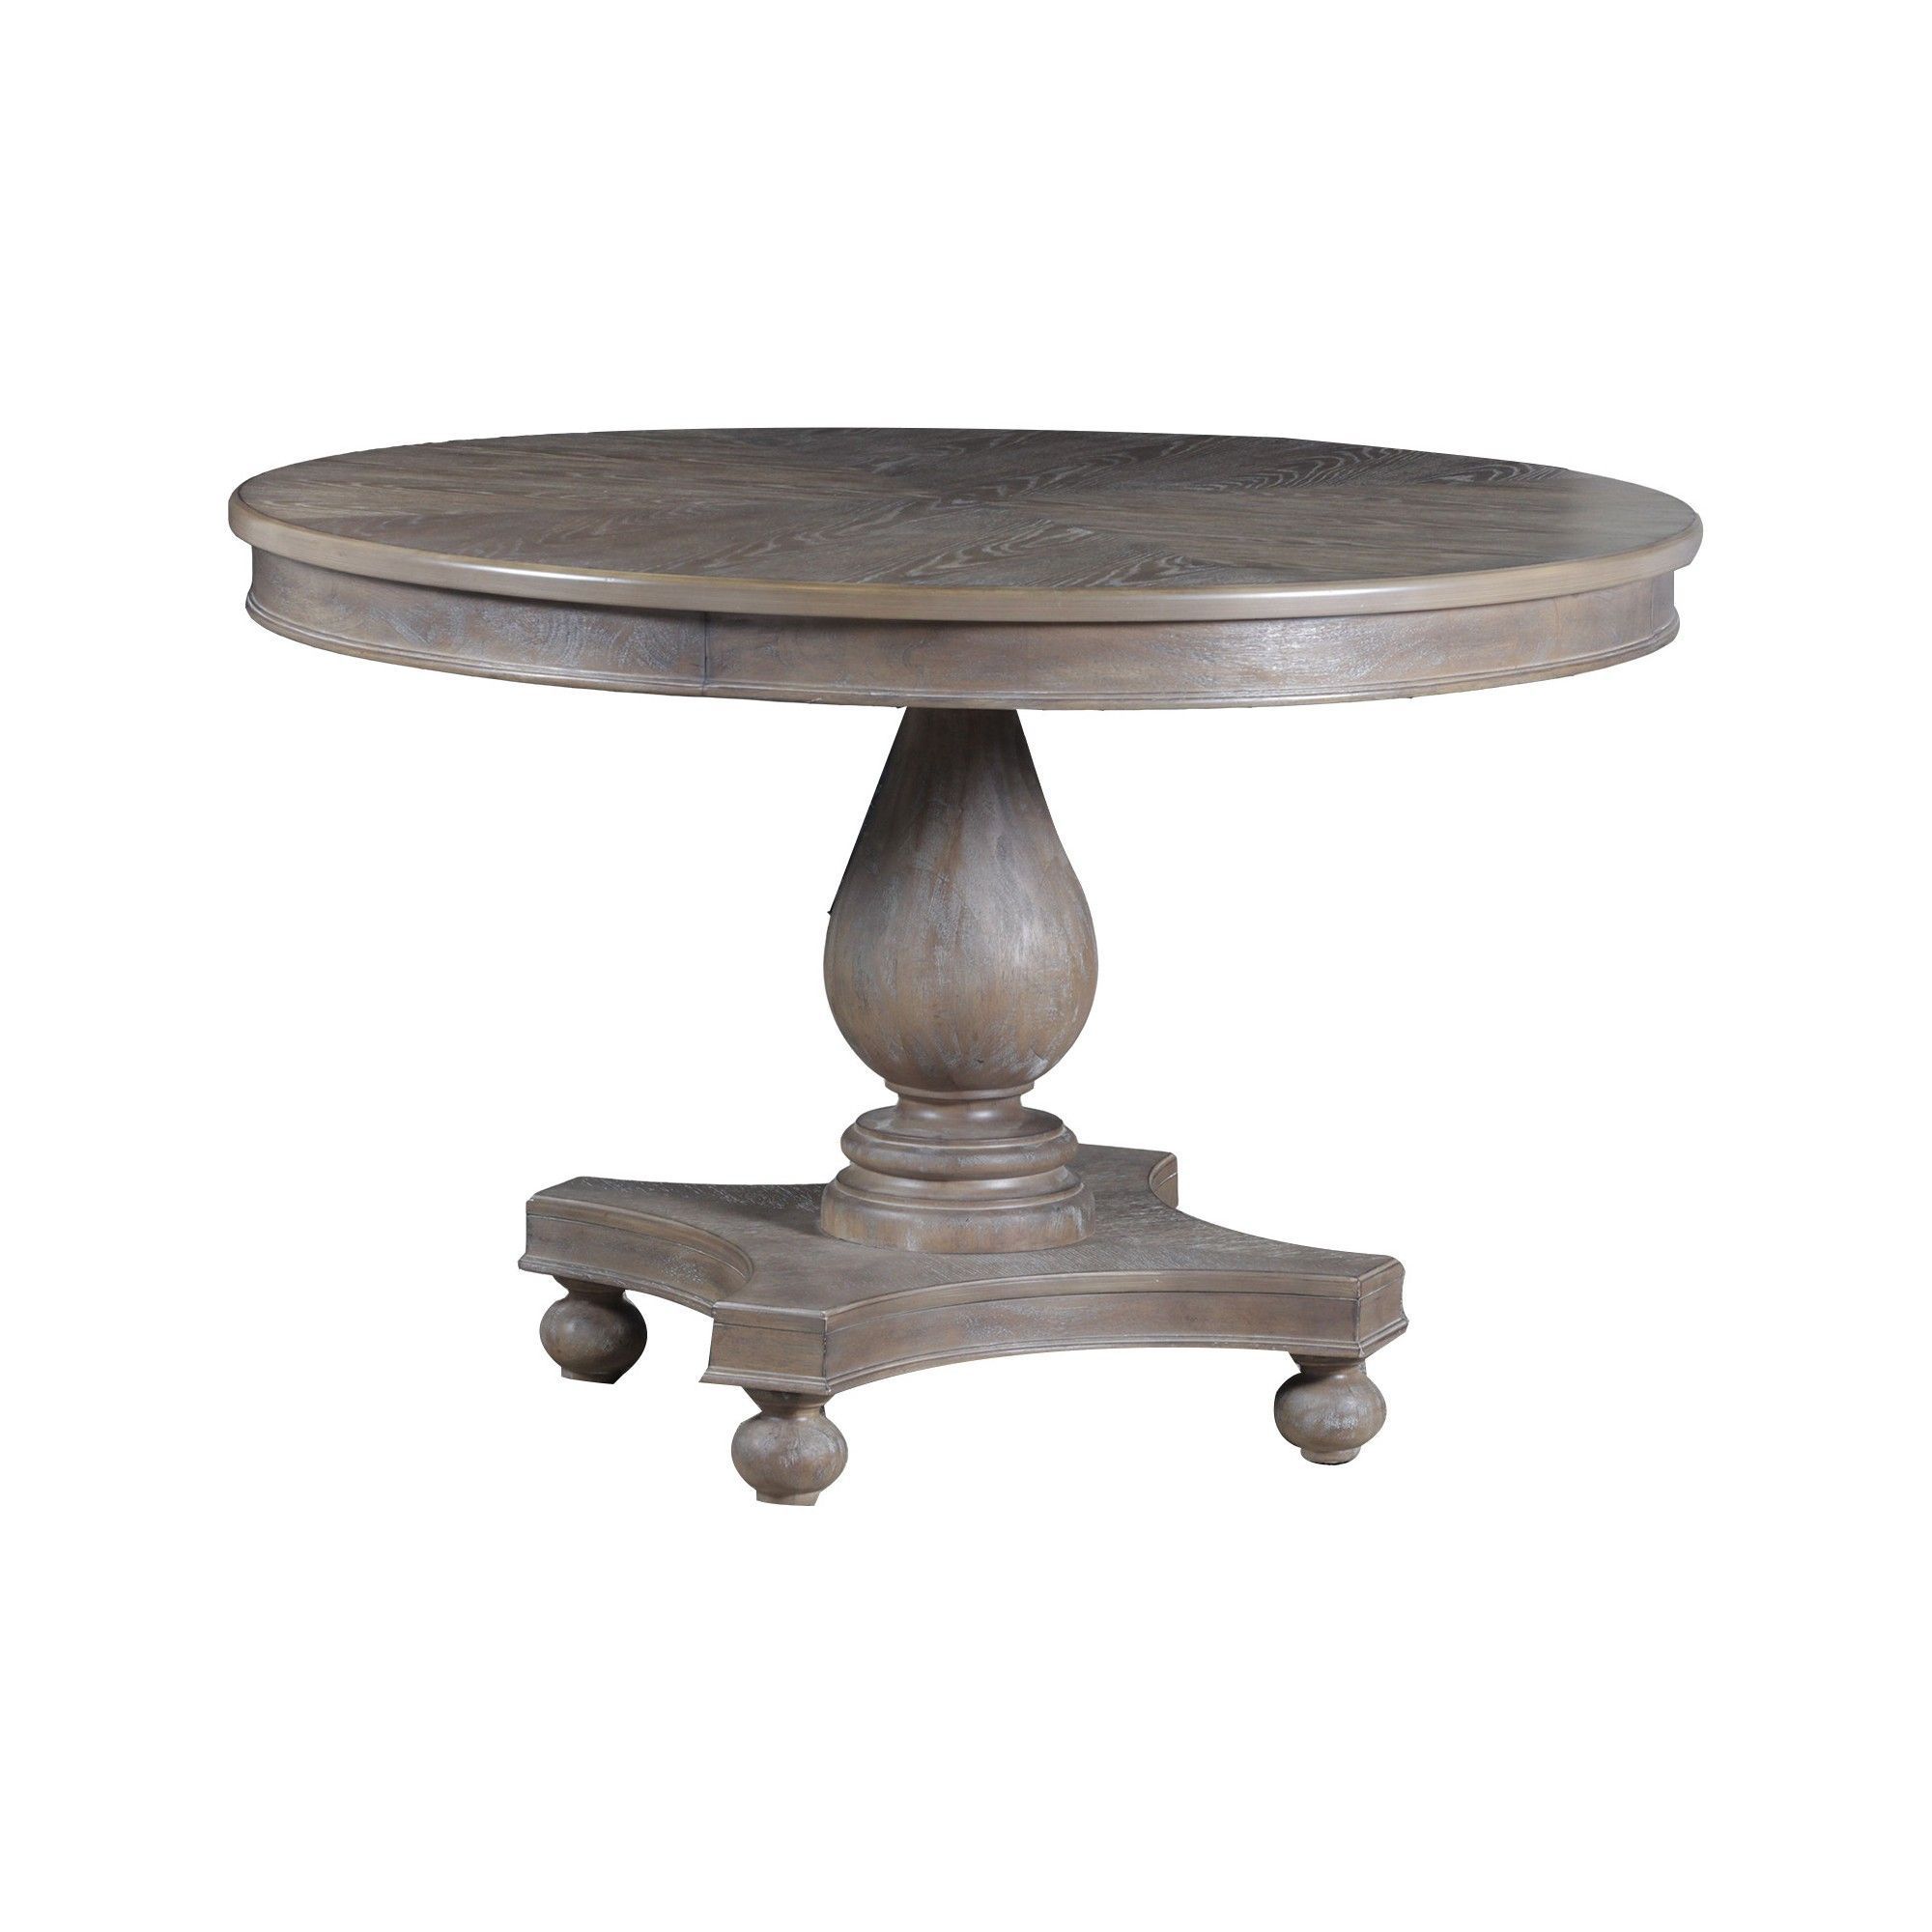 Olivia Round Dining Table – Distressed Gray Wash – Oak Intended For Most Recent Gray Wash Lorraine Extending Dining Tables (View 2 of 25)